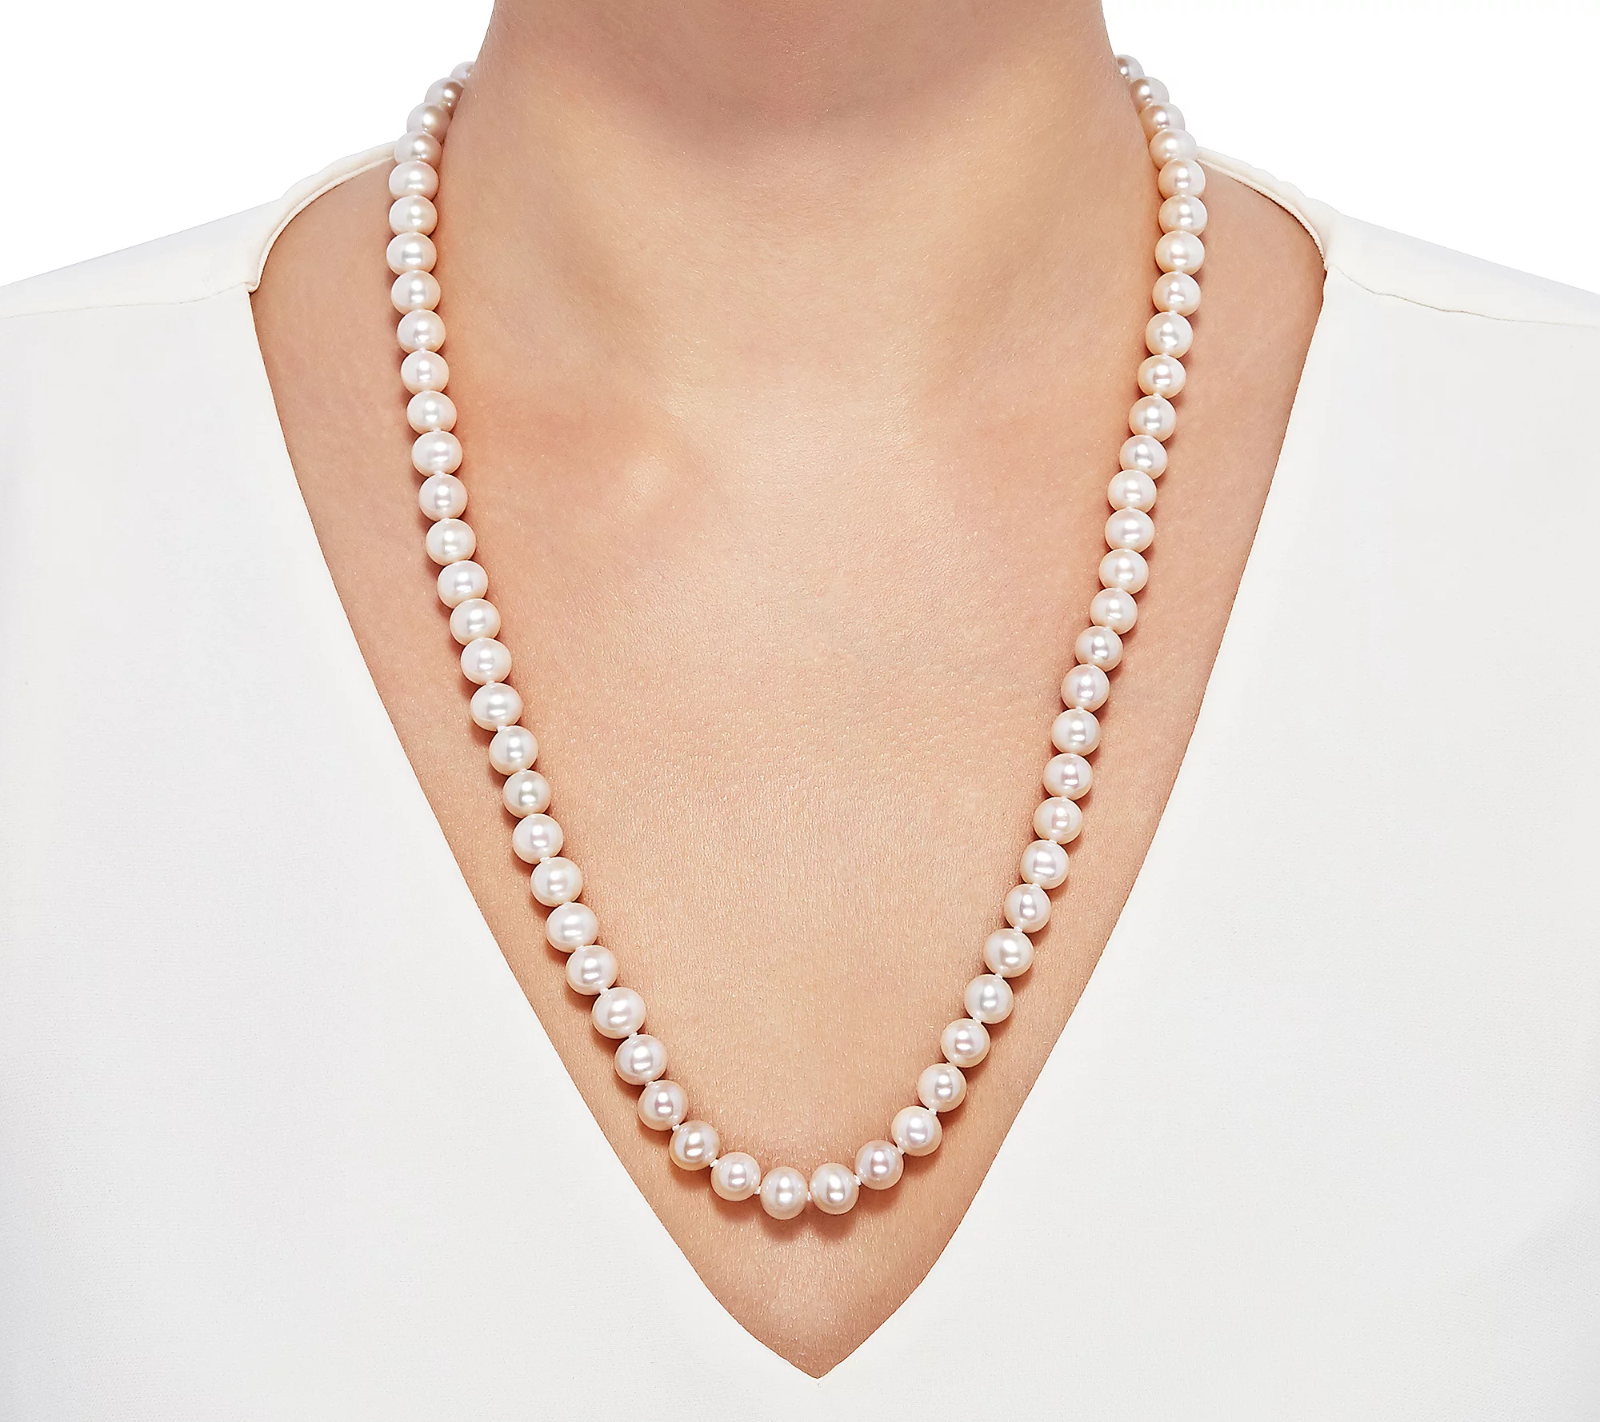 14K Yellow Gold Cultured Freshwater Pearl 24" Necklace | Jewelry & Watches:Fine Jewelry: Necklaces & Pendants